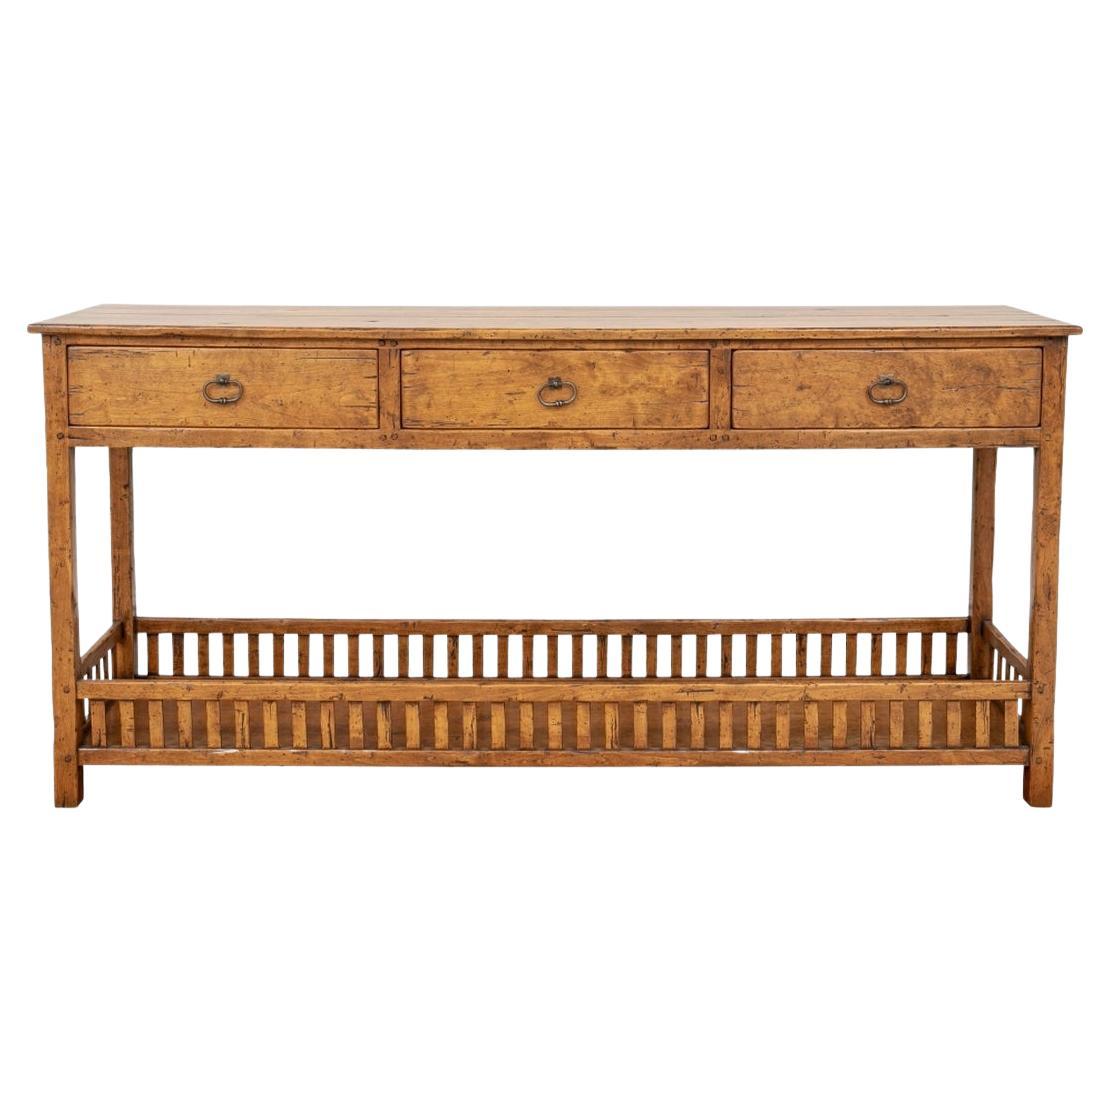 Rustic Style Console Table in Solid Hardwood After Bausman